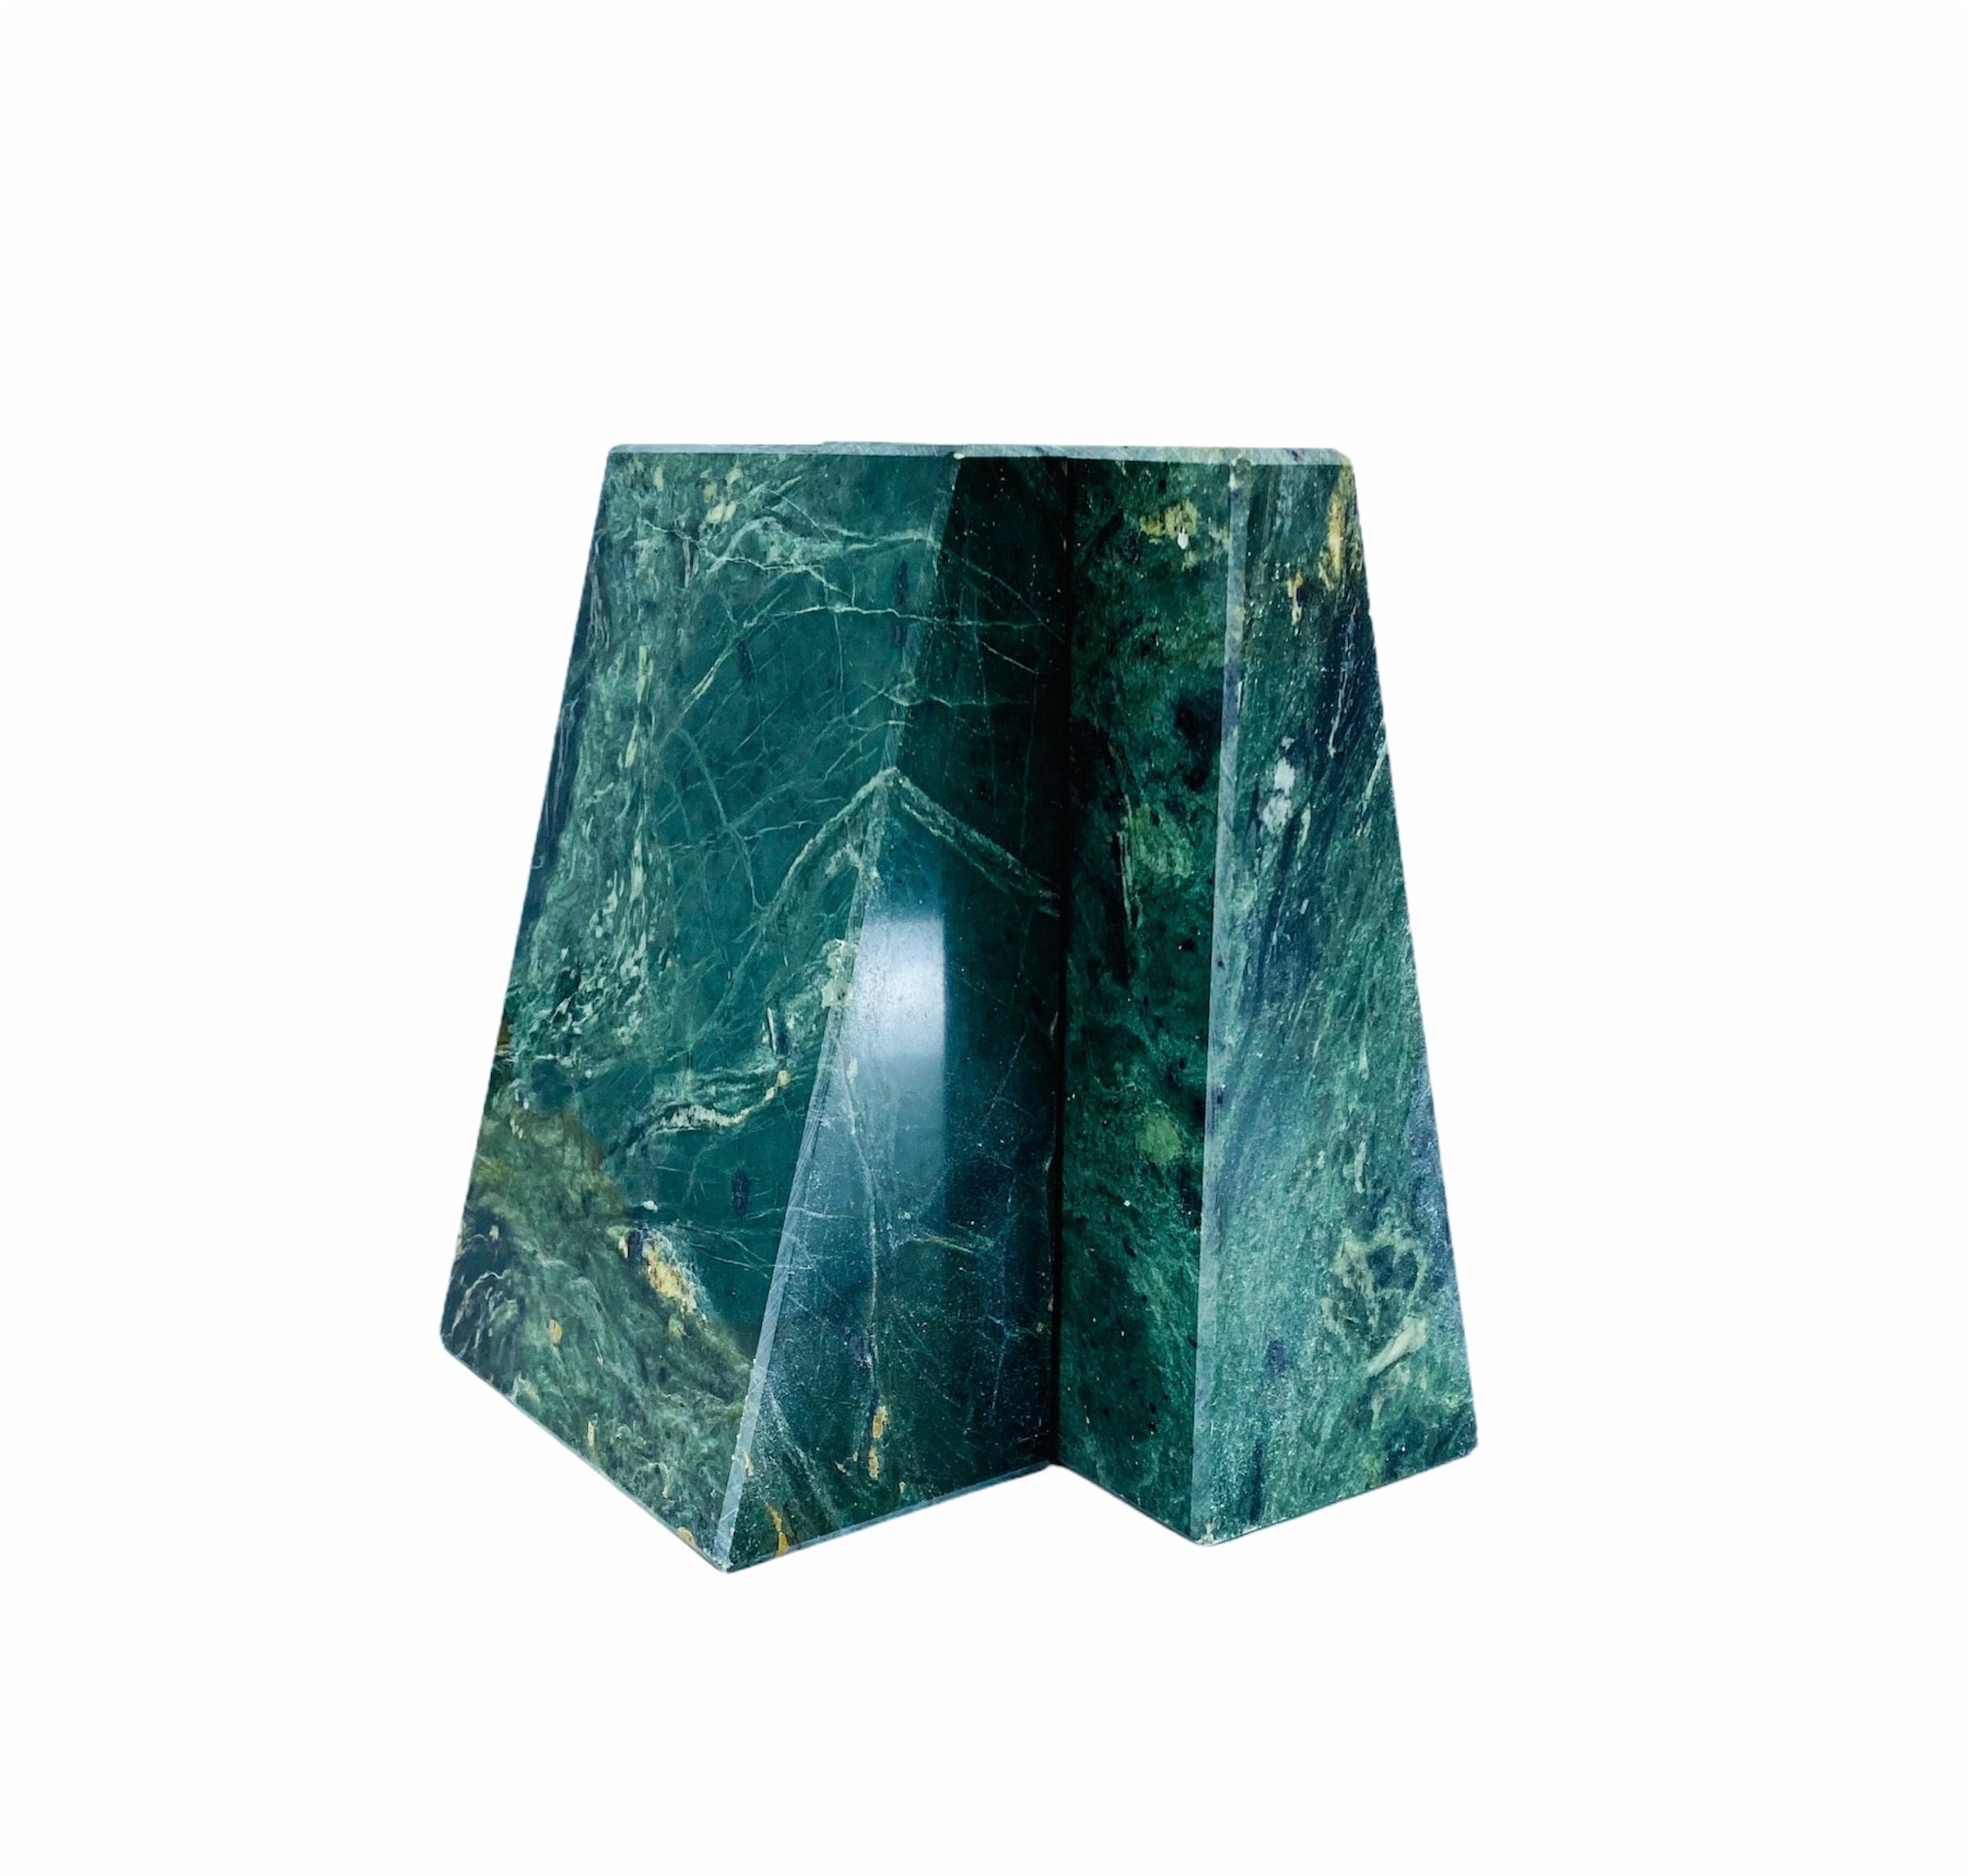 Solid Green Marble Geometric Bookends